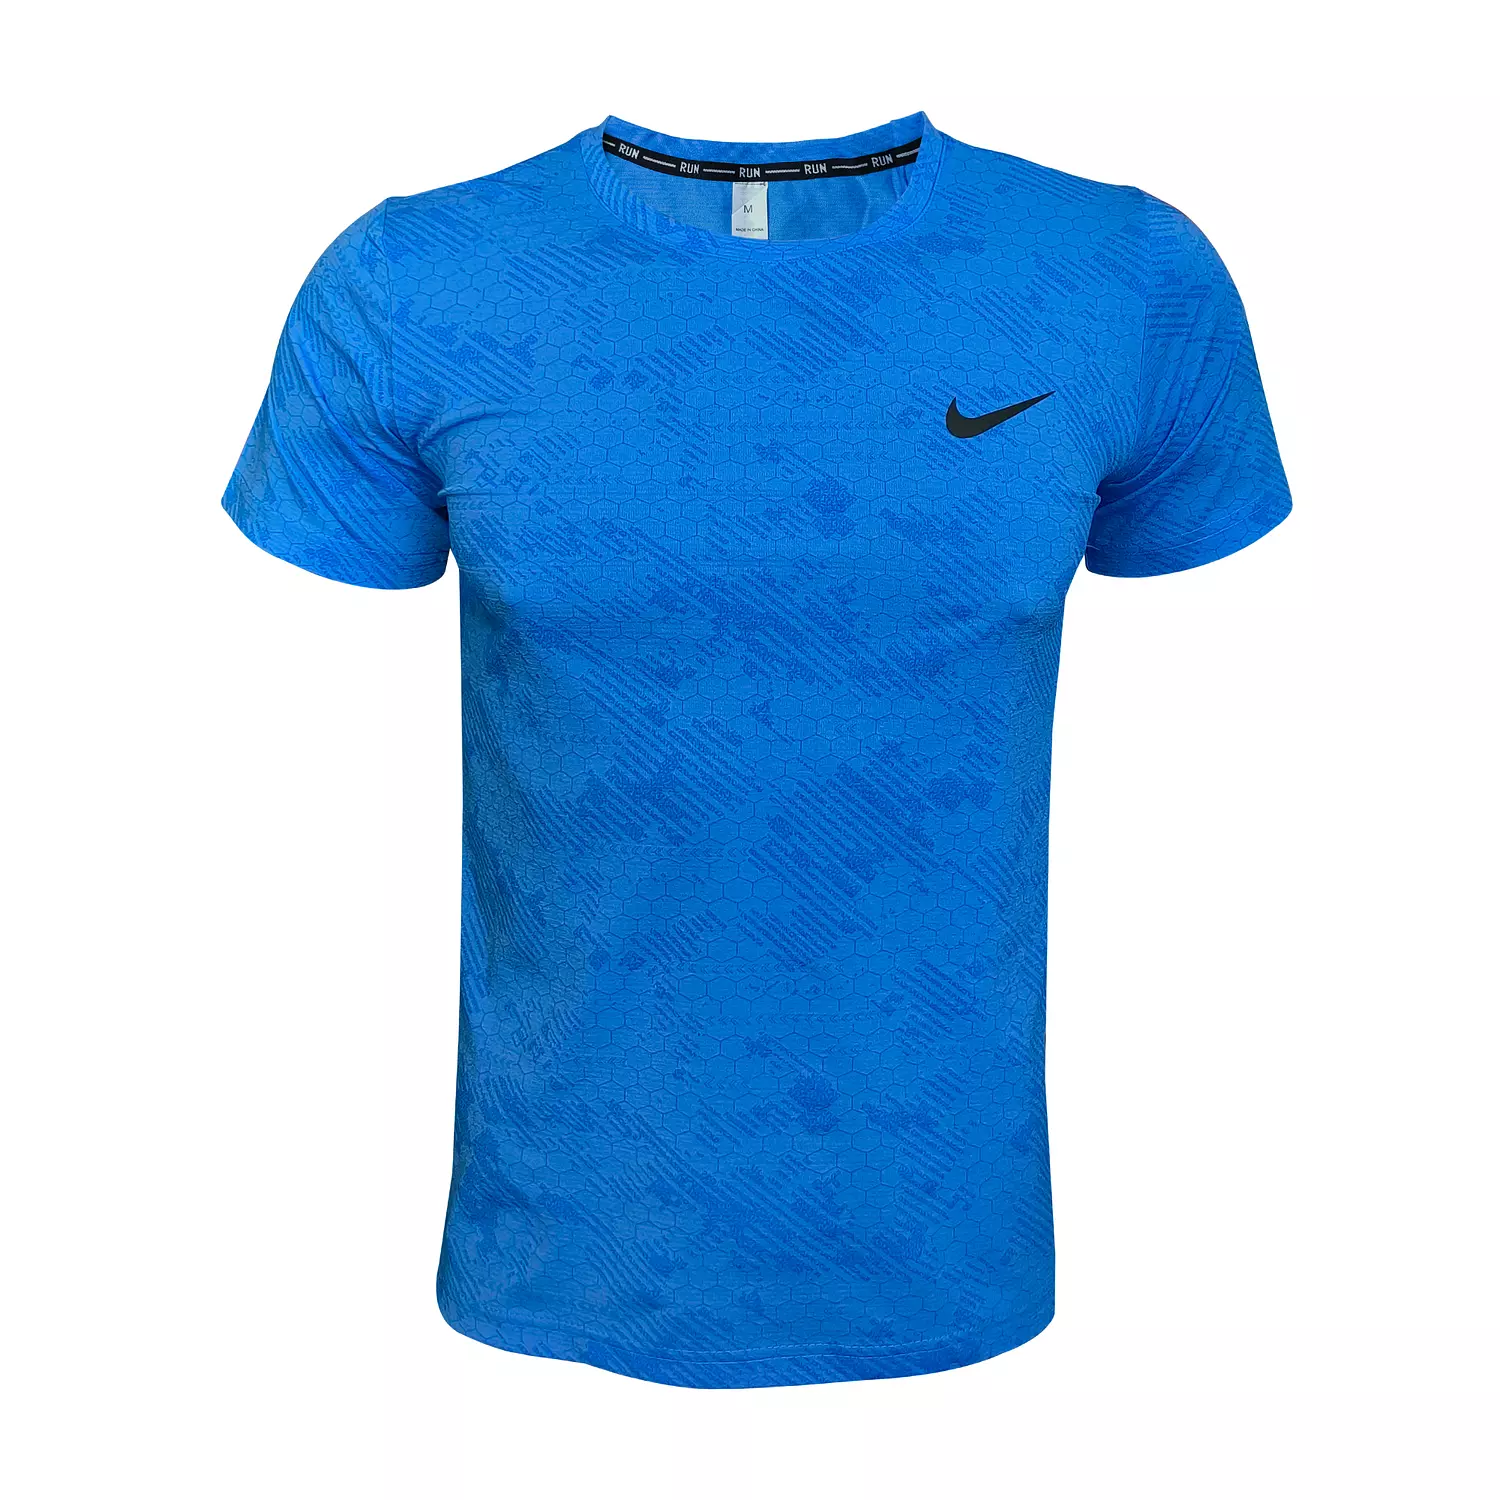 <p><strong>NIKE</strong> </p><p><span style="color: #737373">TRAINING T-SHIRT</span></p>